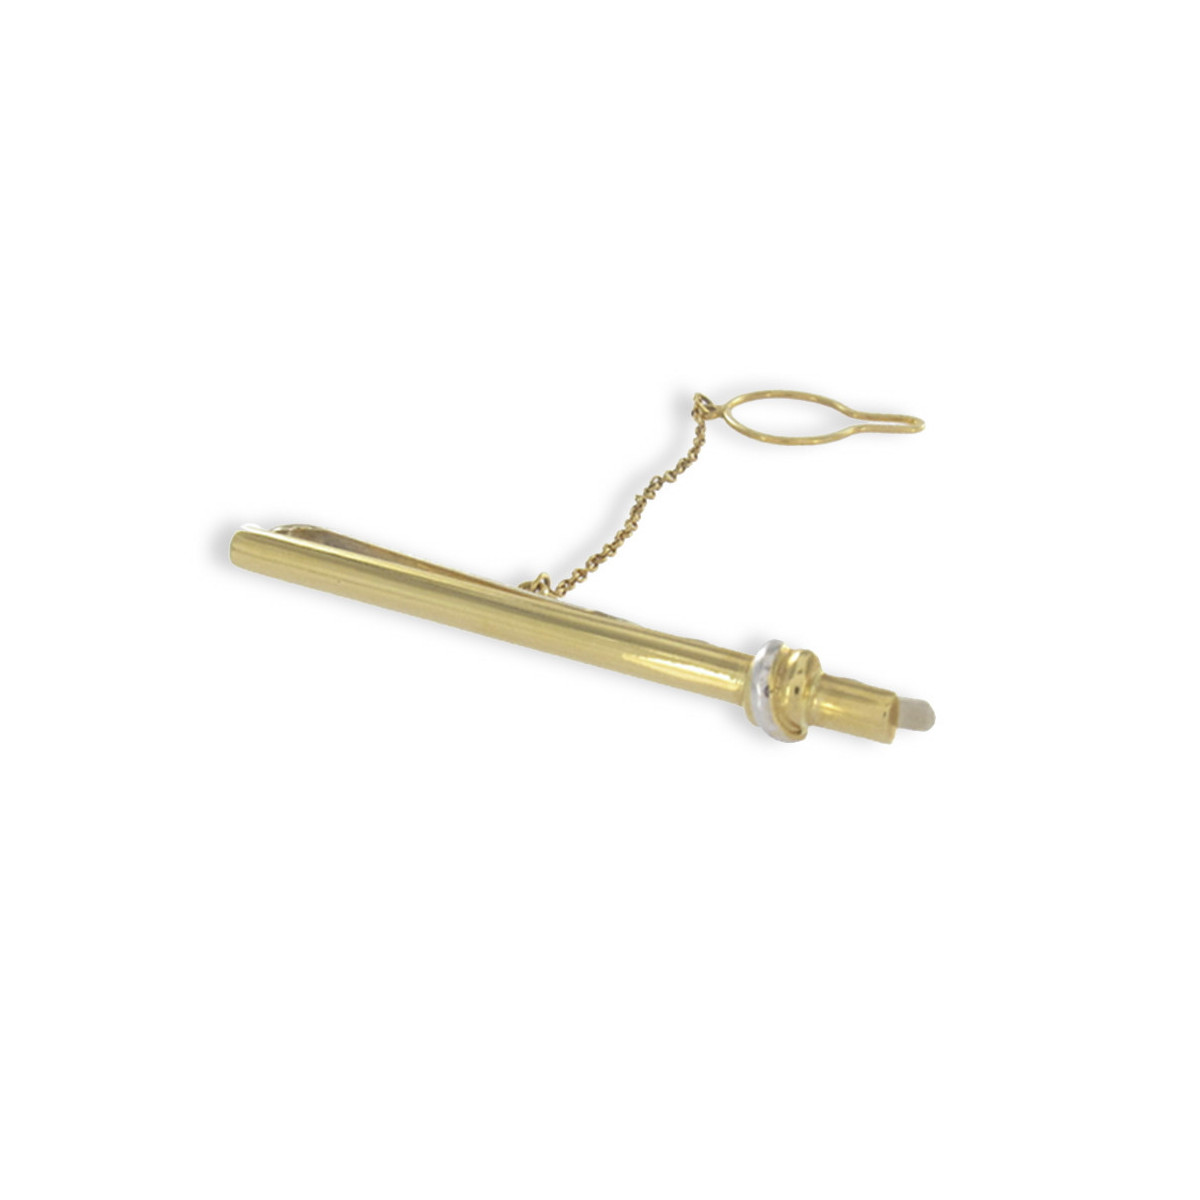 GOLD TIE PIN WITH PATTERN